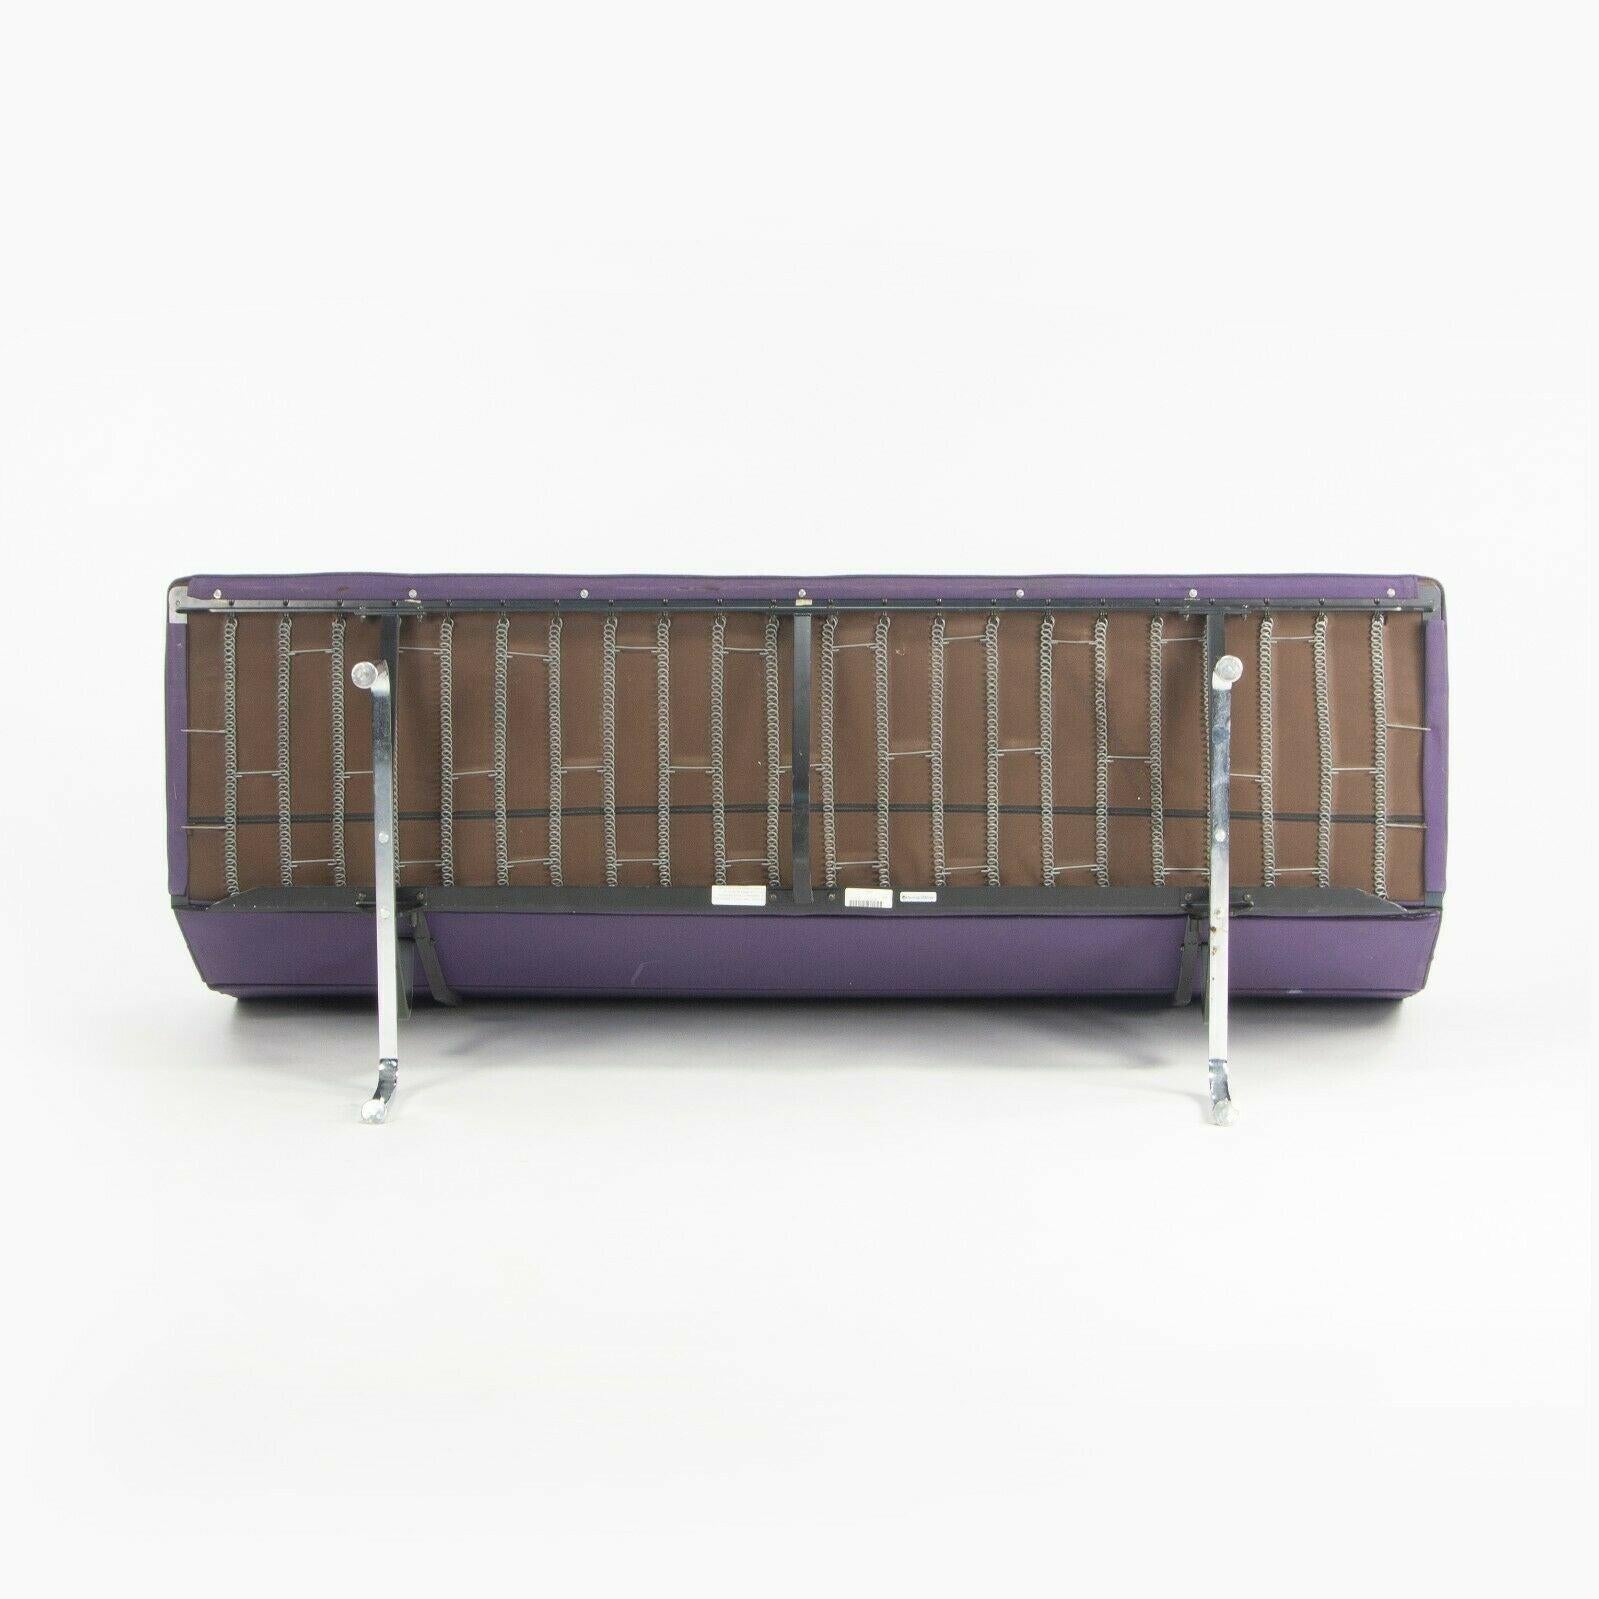 Américain 2006 Herman Miller Ray and Charles Eames Sofa Compact Purple Fabric Upholstery (Canapé compact en tissu violet) en vente